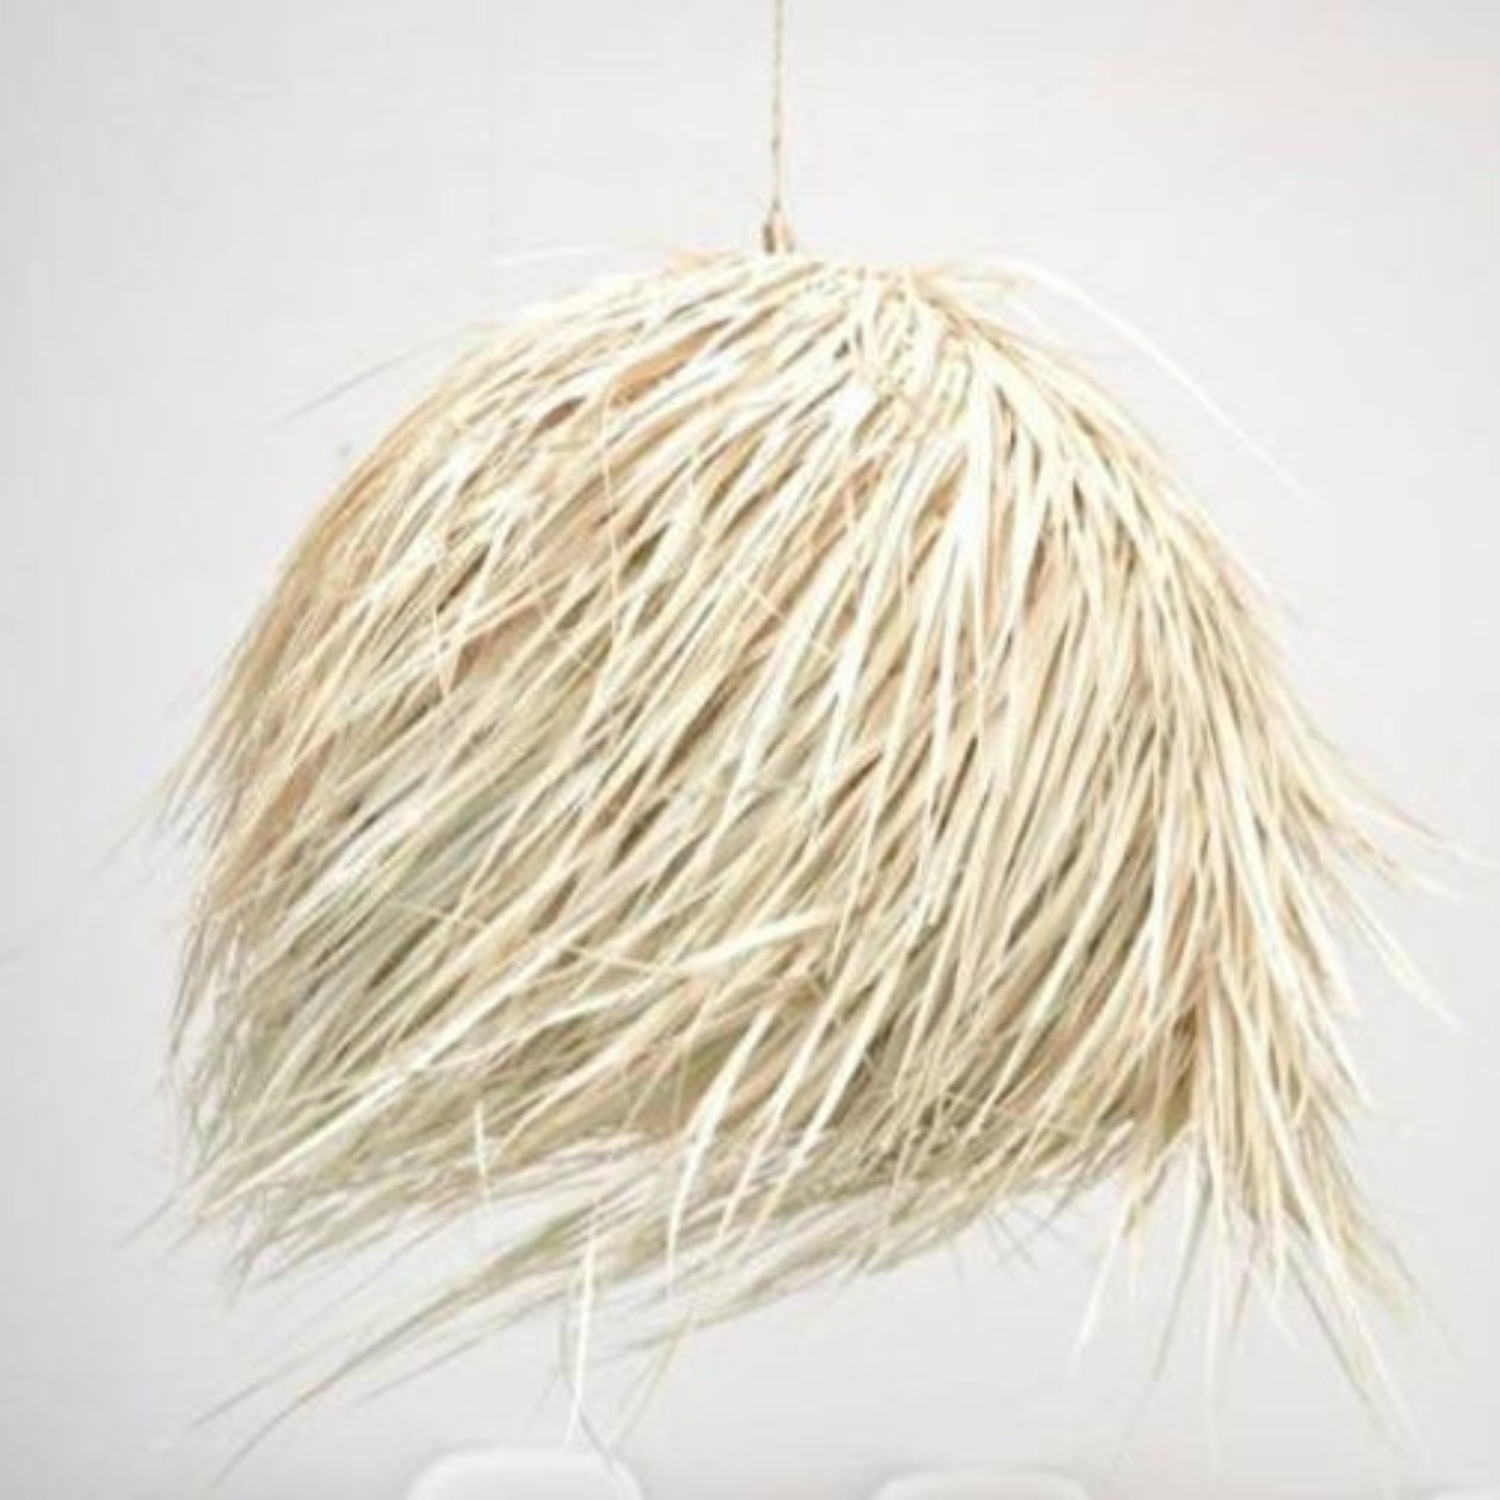 Conical Lampshades ,made by Palm Leaf in Morocco